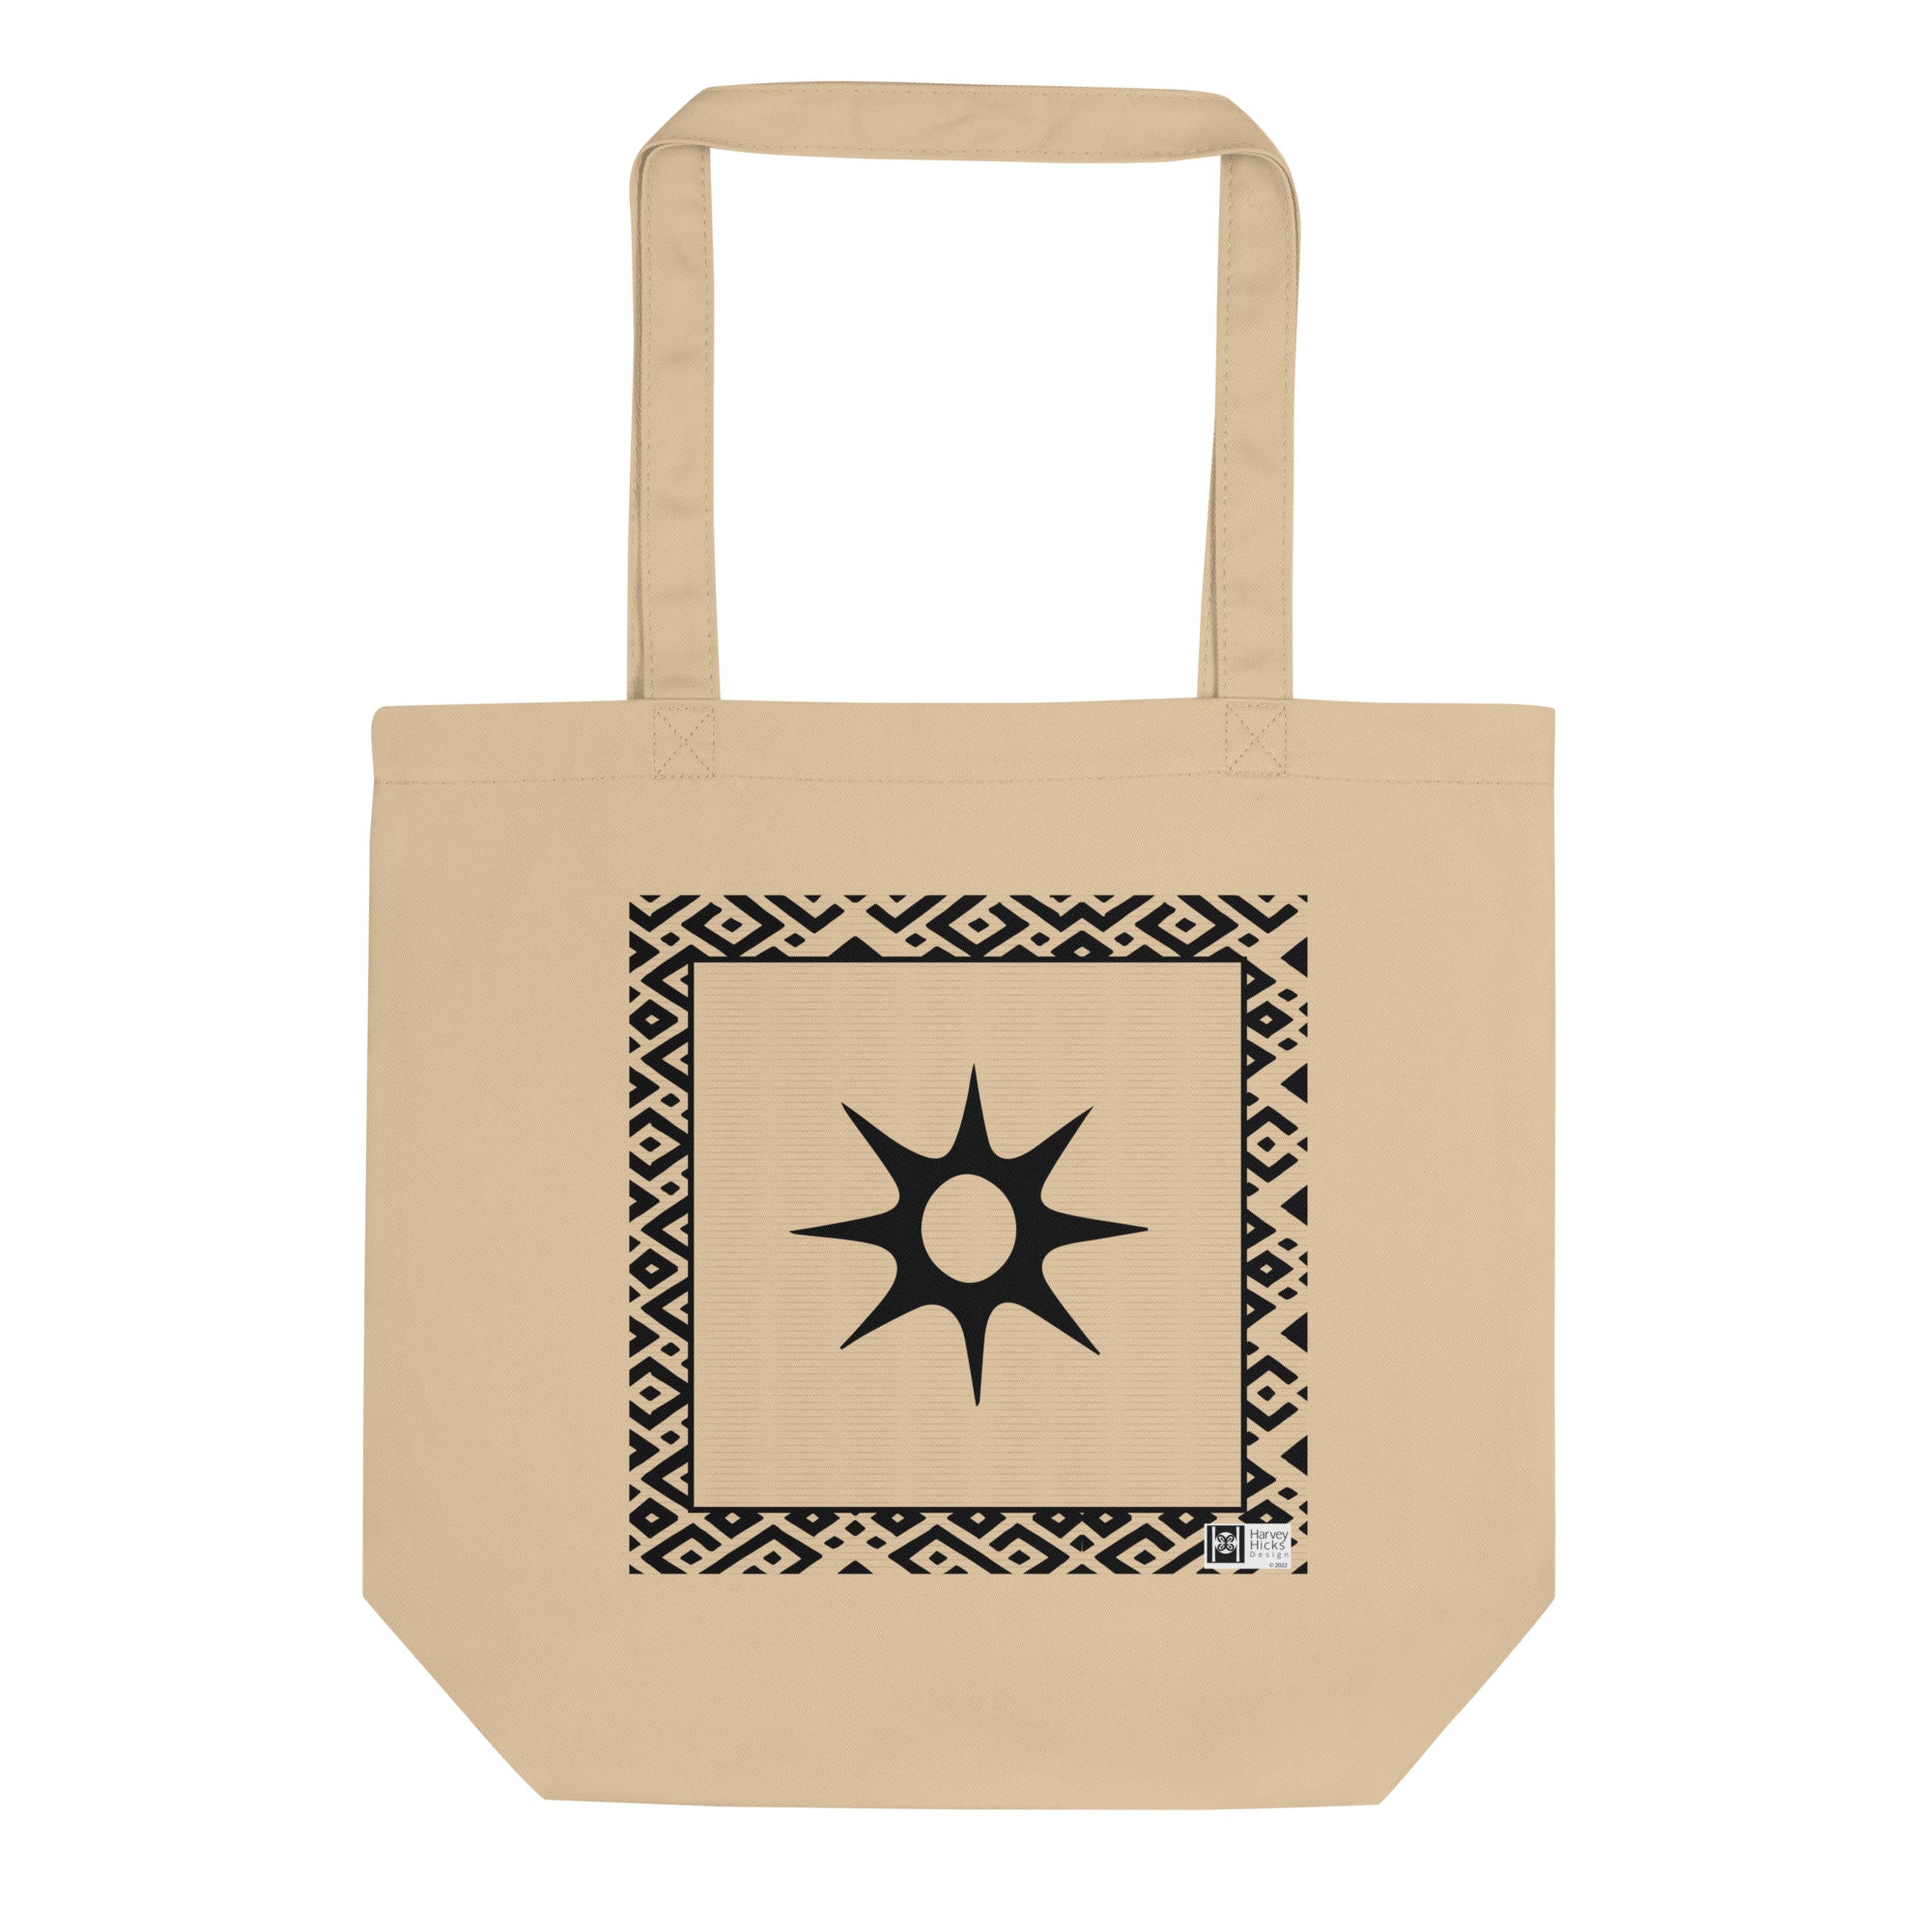 100% cotton Eco Tote Bag, featuring the Adinkra symbol for faith in All That Is, NO TEXT